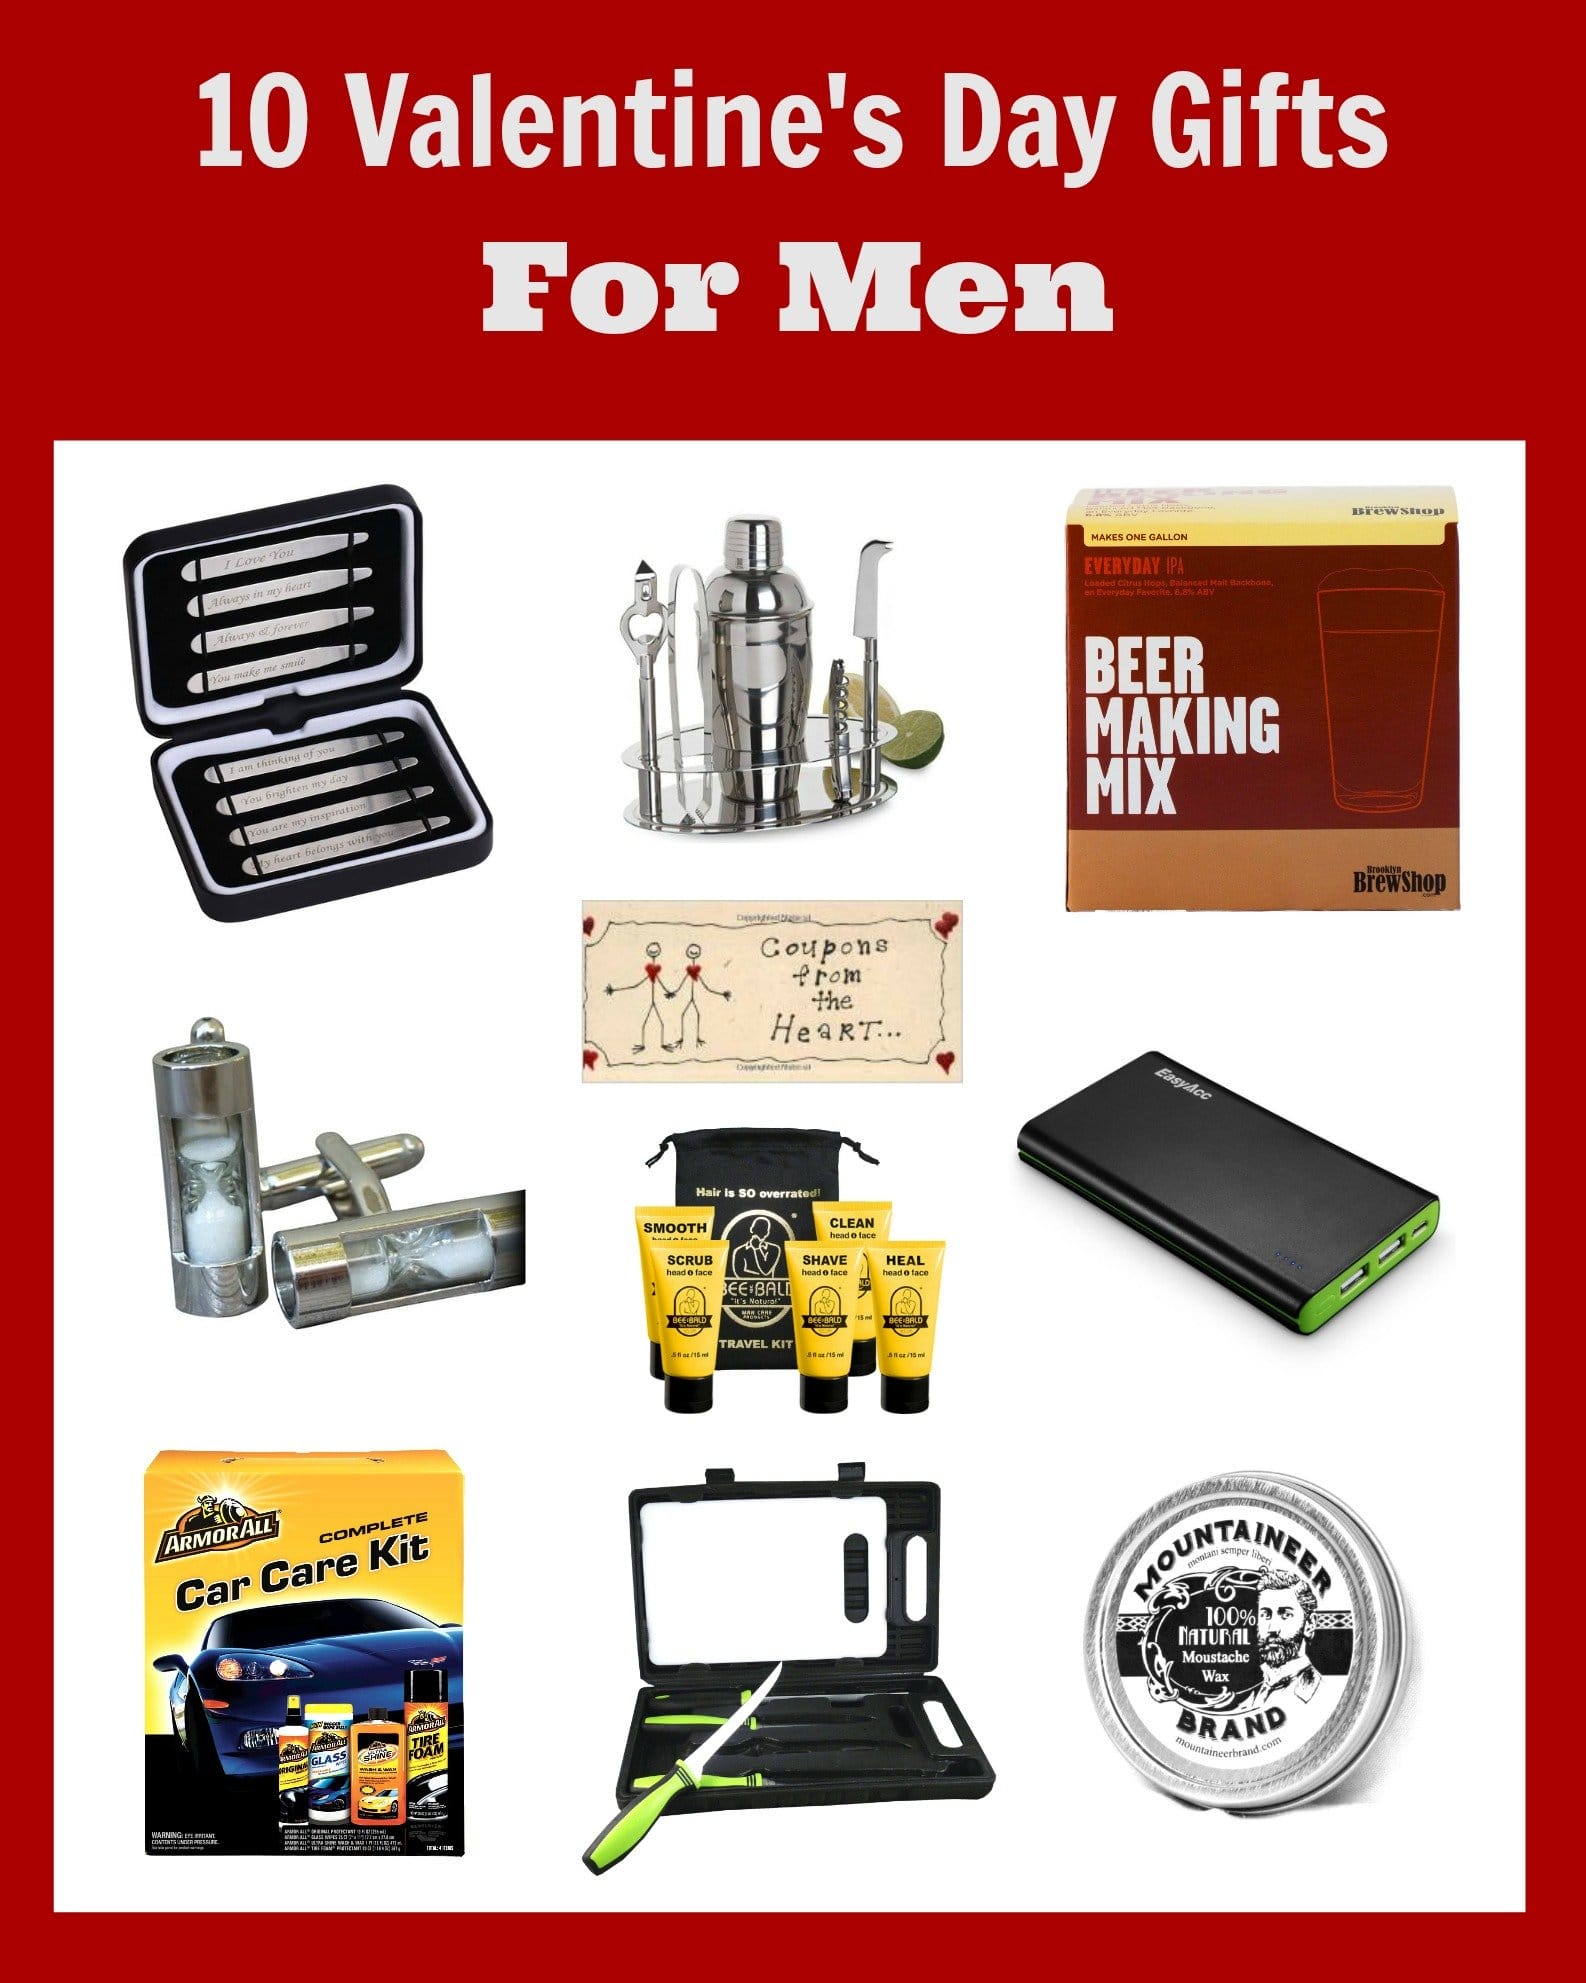 10 Best Valentine's Day Gifts For Men 2021 